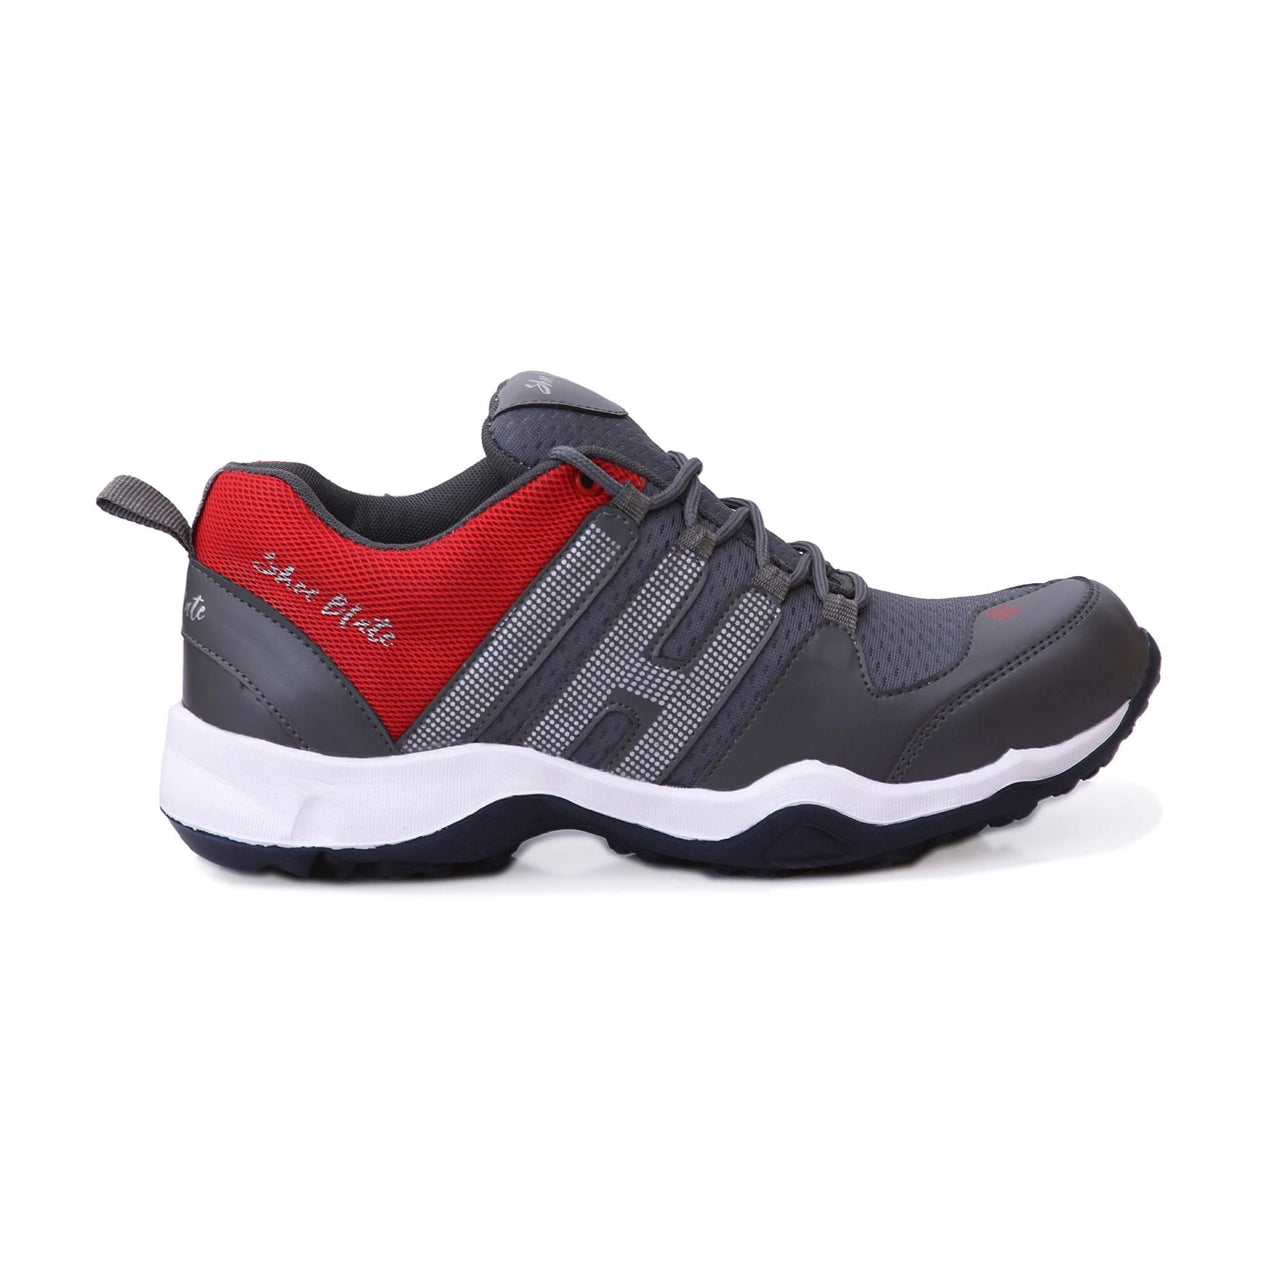 Men's Synthetic Lace Up Sport shoes